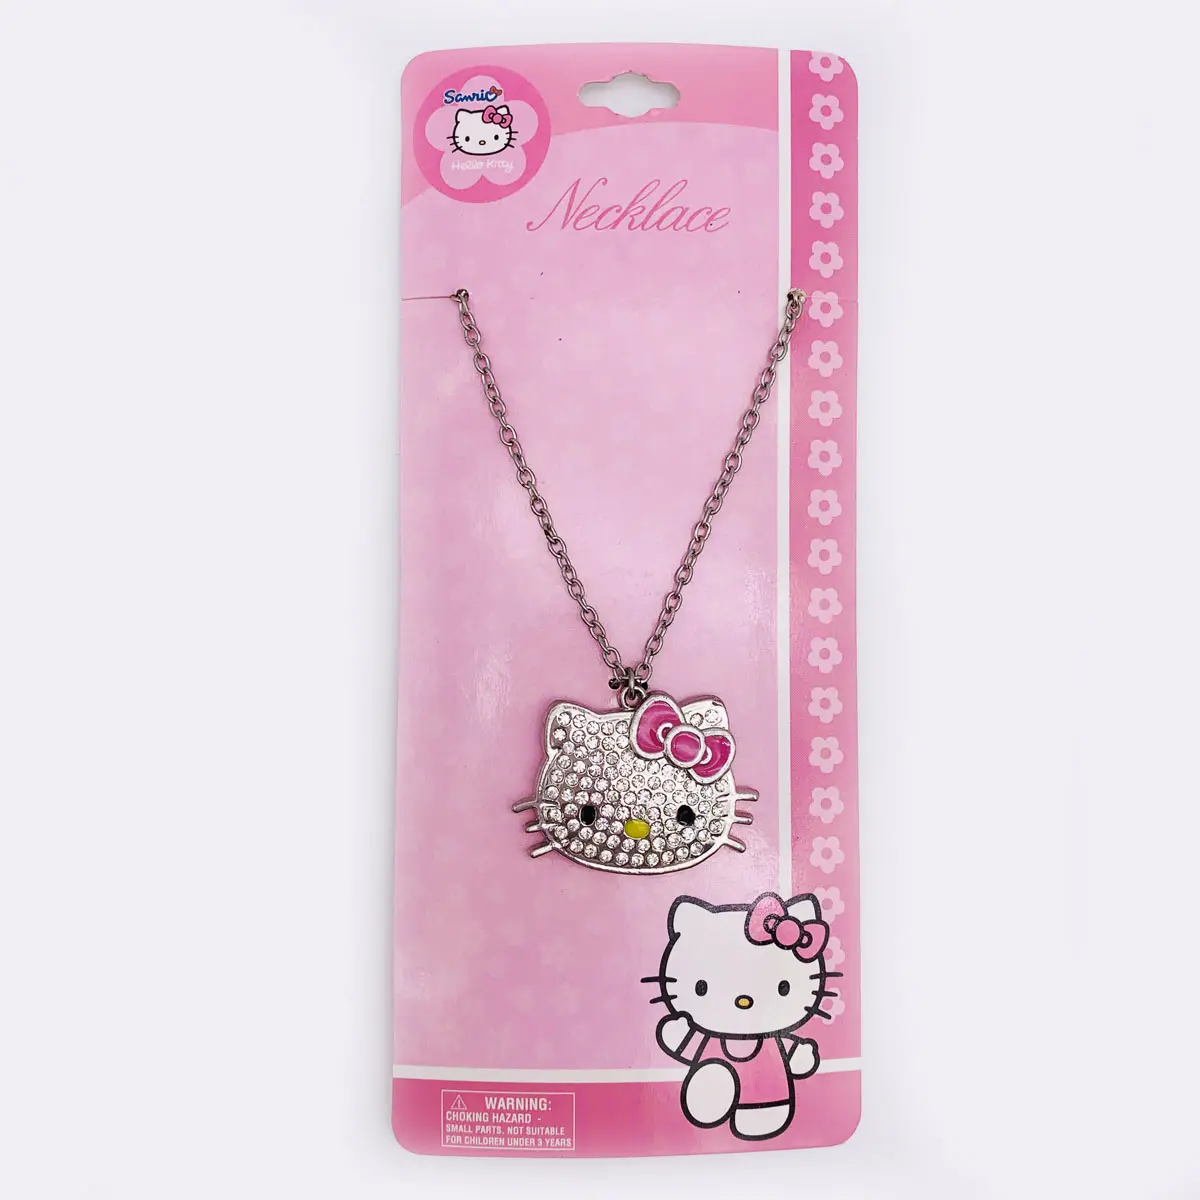 hello kitty necklace crystal sterling silver necklace Hasbro NBC universal avon Sedex BSCI audit jewelry factory